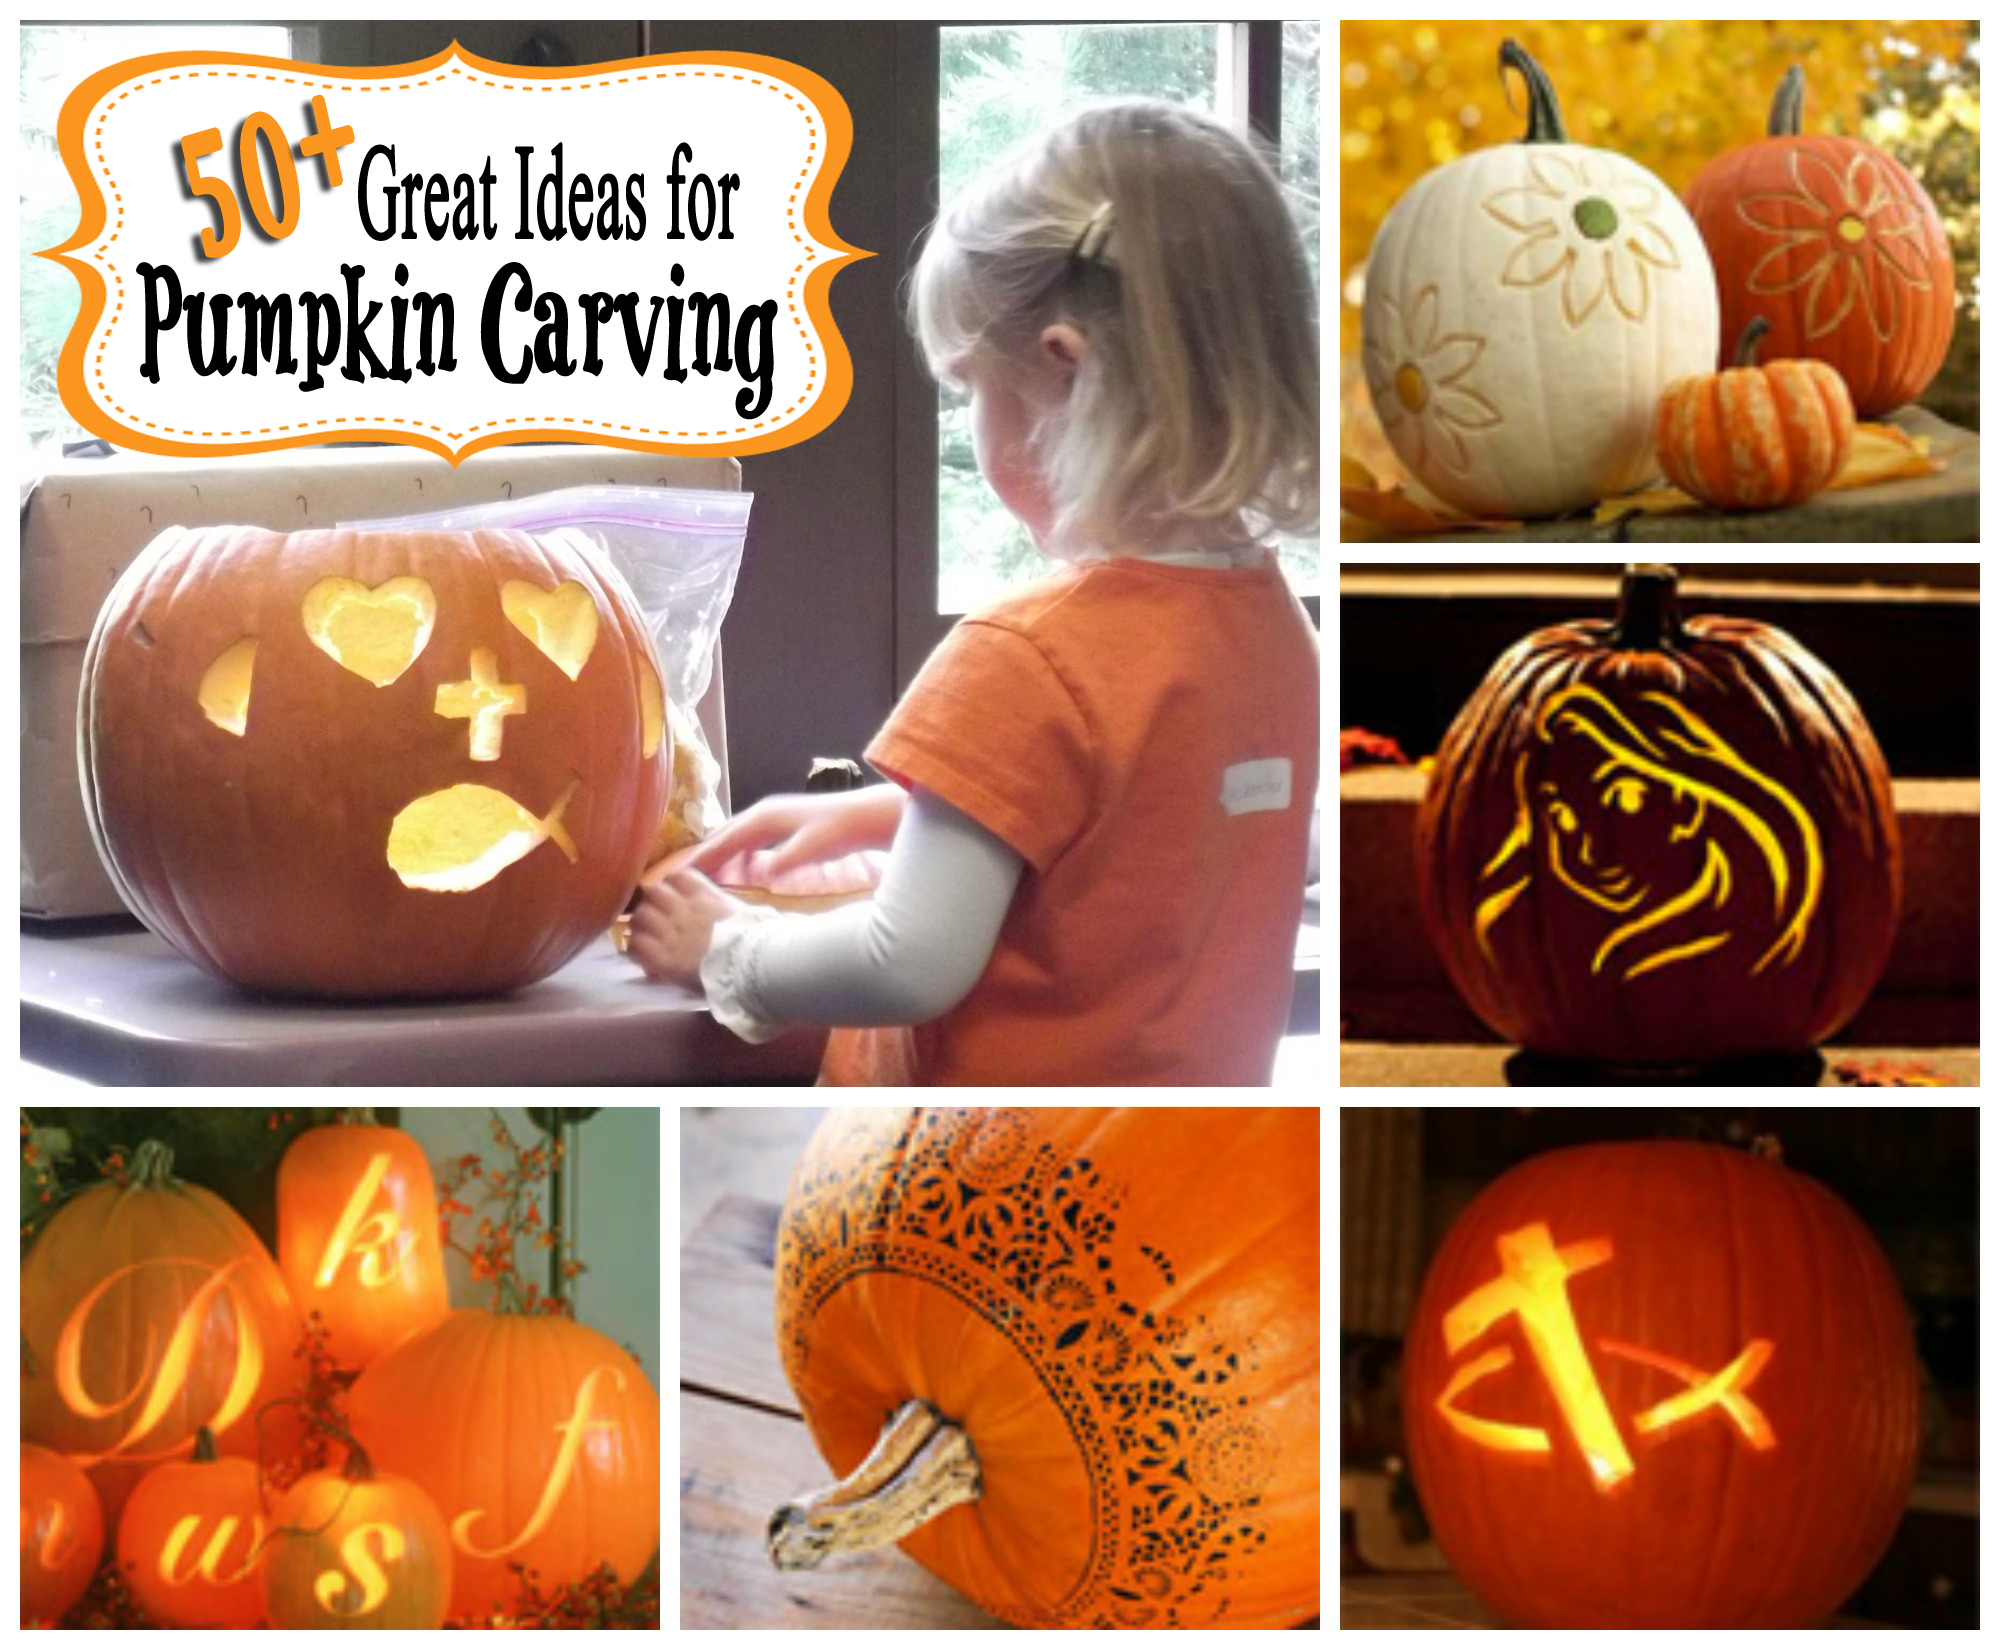 Halloween Pumpkin Carving and Decorating Ideas